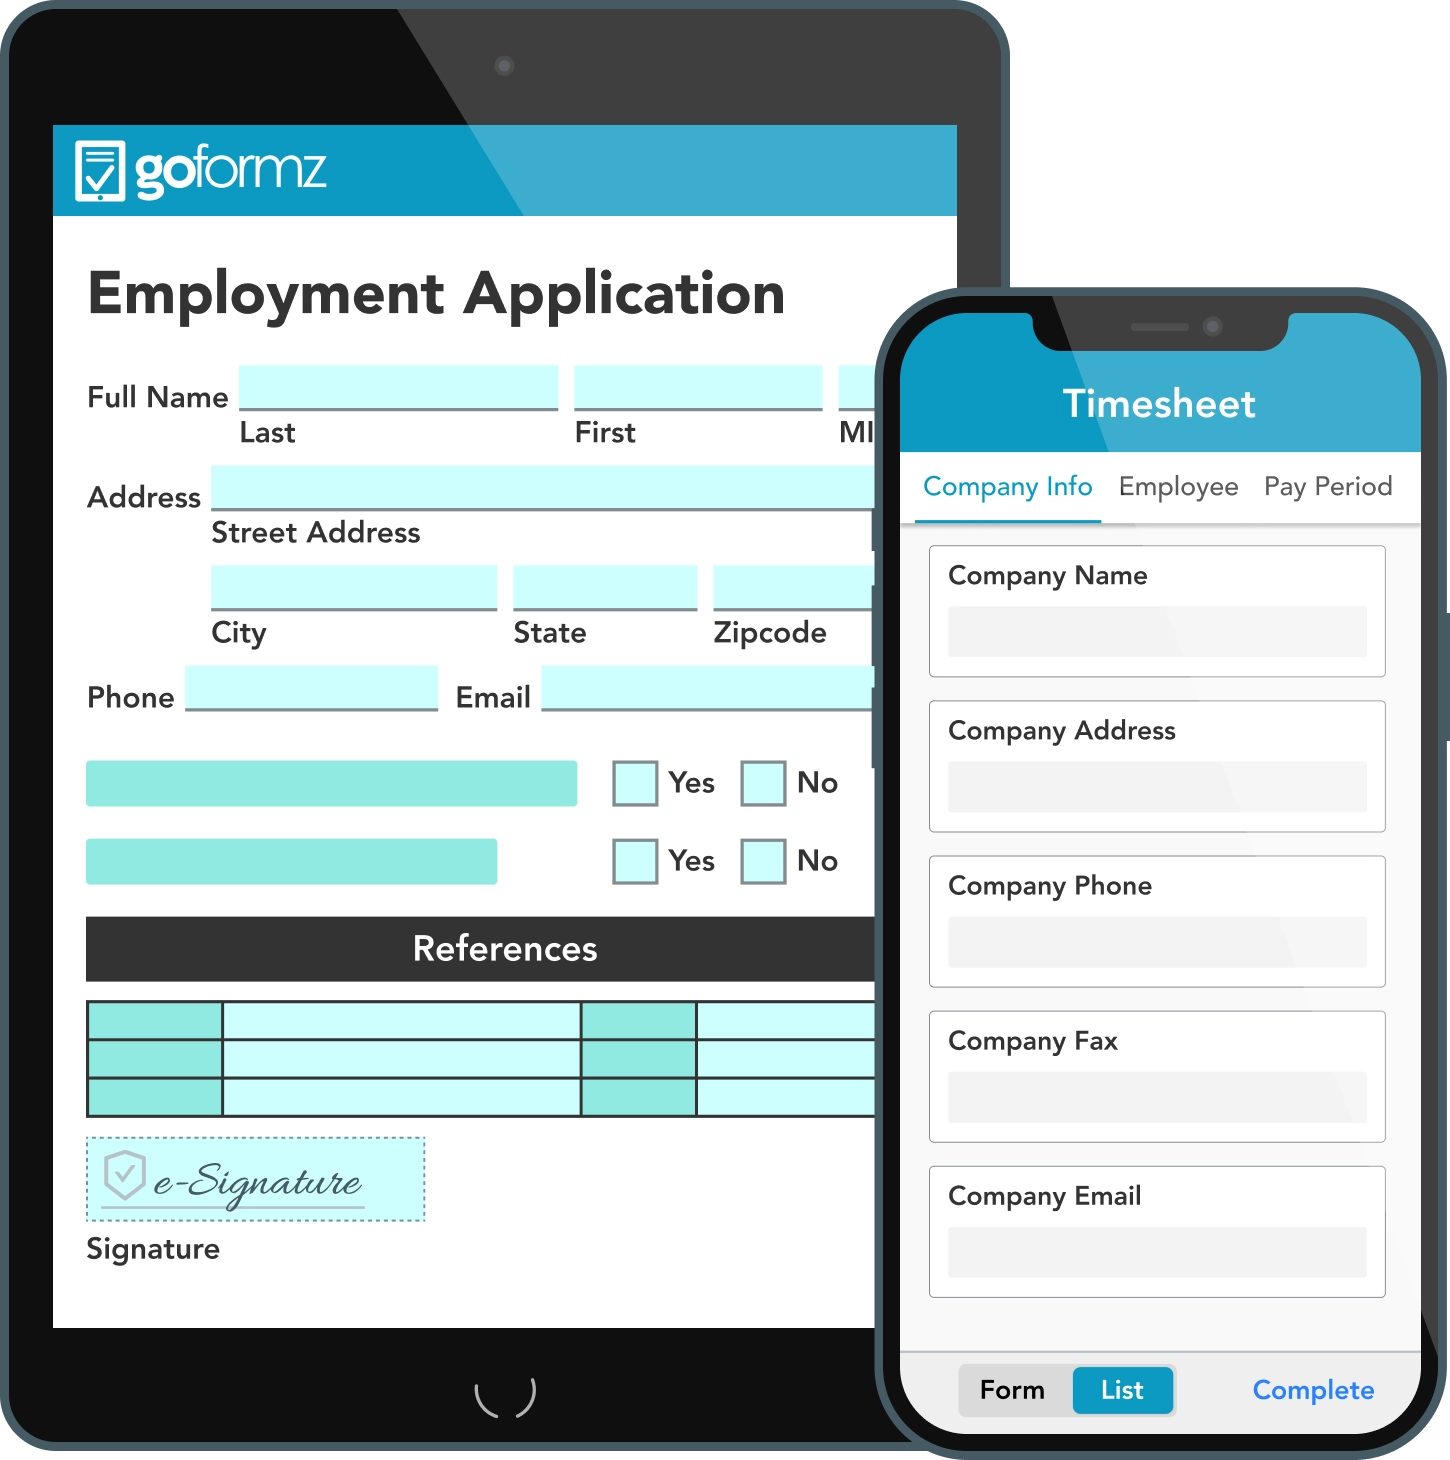 Digitize forms by uploading a document to the online form builder.